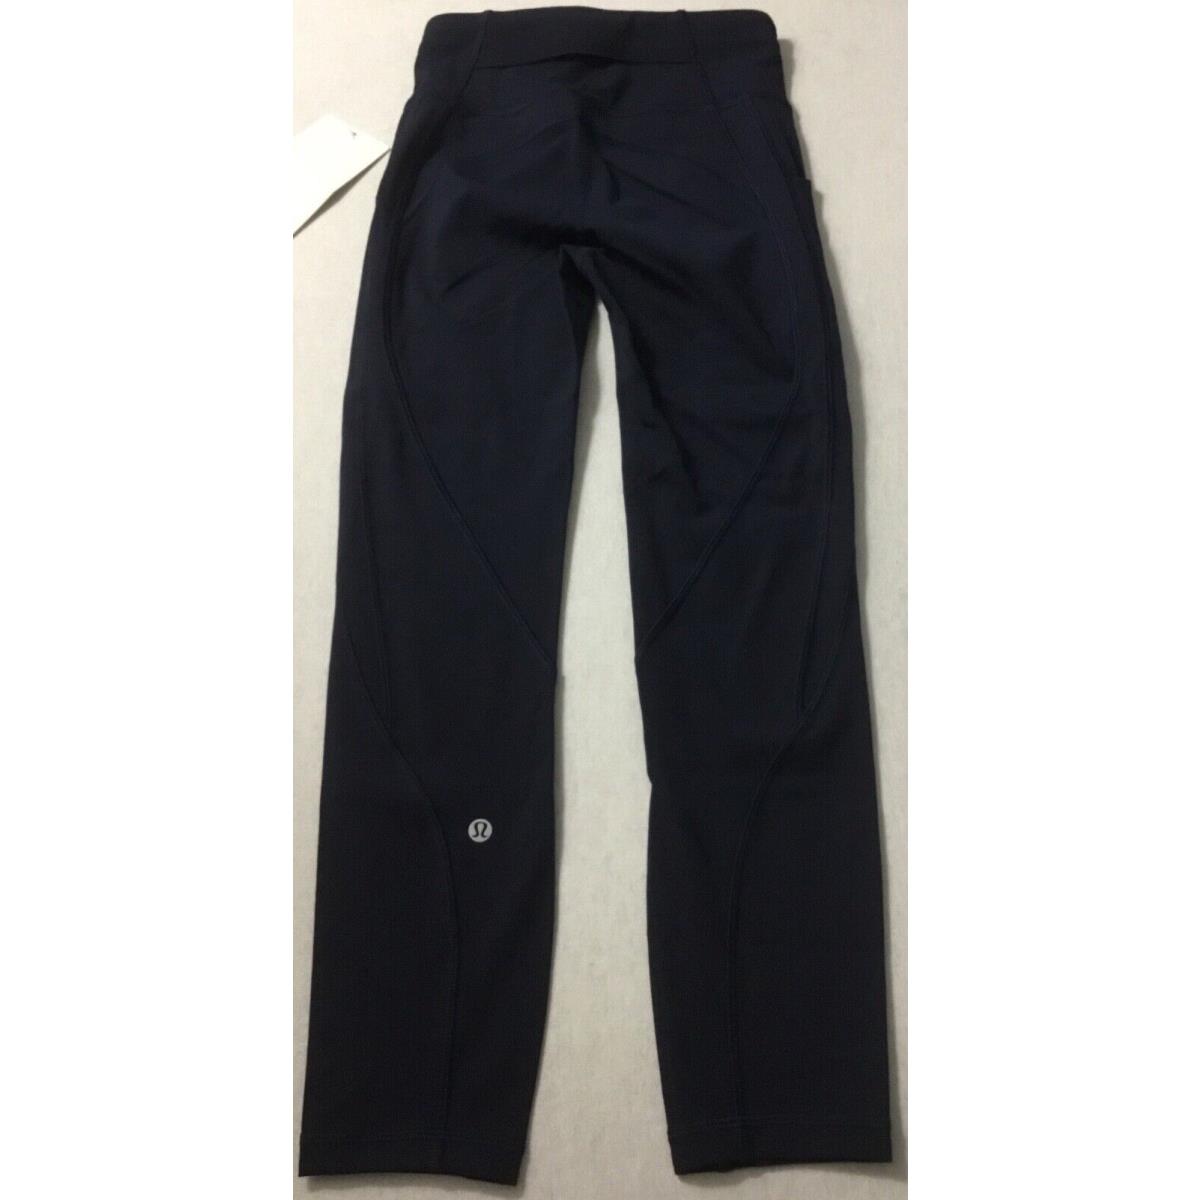 Lululemon Time To Sweat Crop 23 Luxtreme LW6BA0S Trnv Navy Blue Size 4